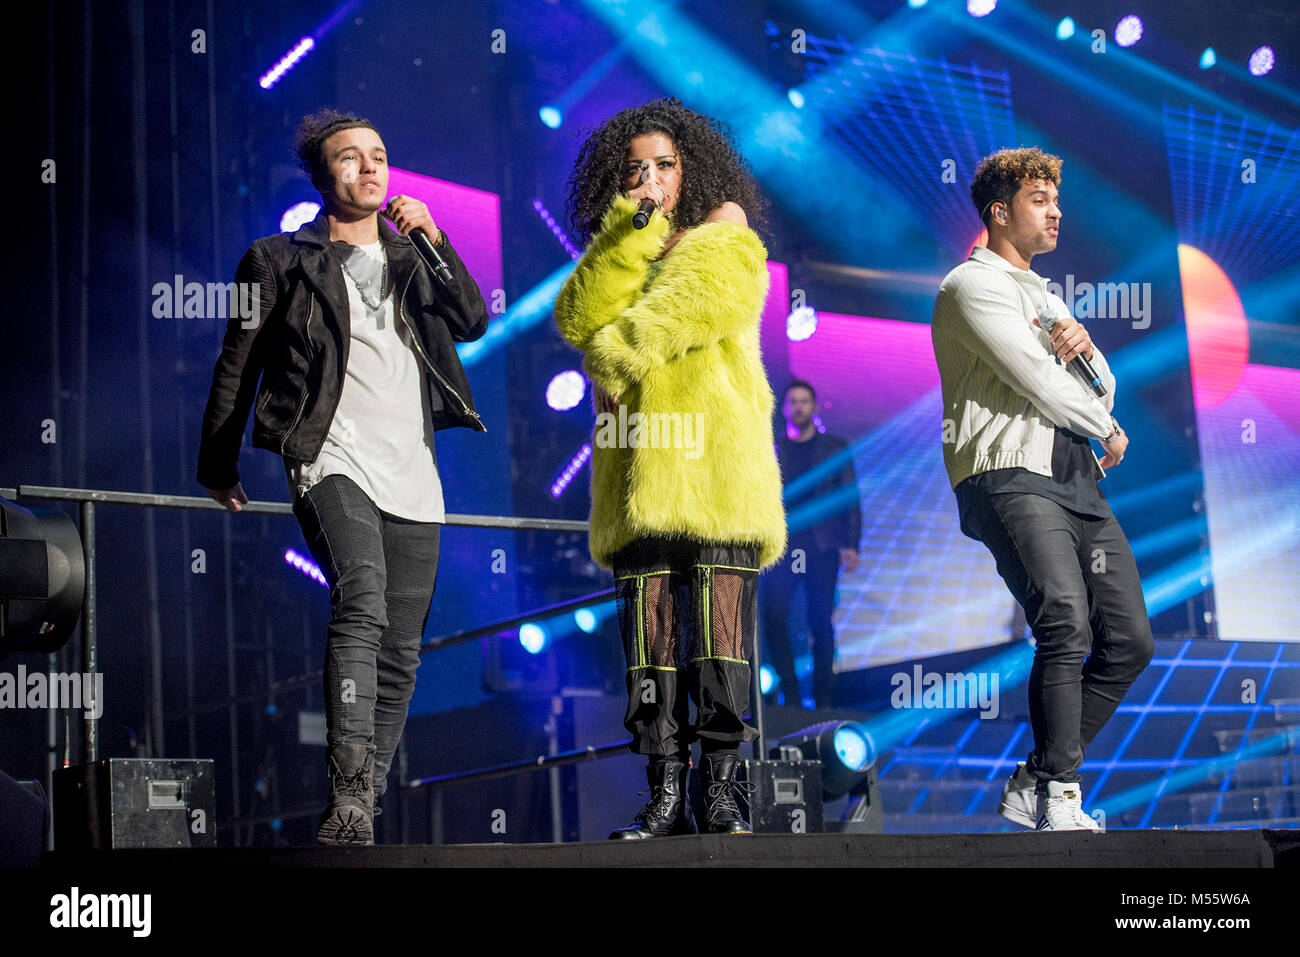 Manchester, UK. 20th February 2018. The Cutkelvins perform on the opening UK night of the 2018 X Factor Live Tour at the Arena in Manchester 20/02/2018 Credit: Gary Mather/Alamy Live News Stock Photo